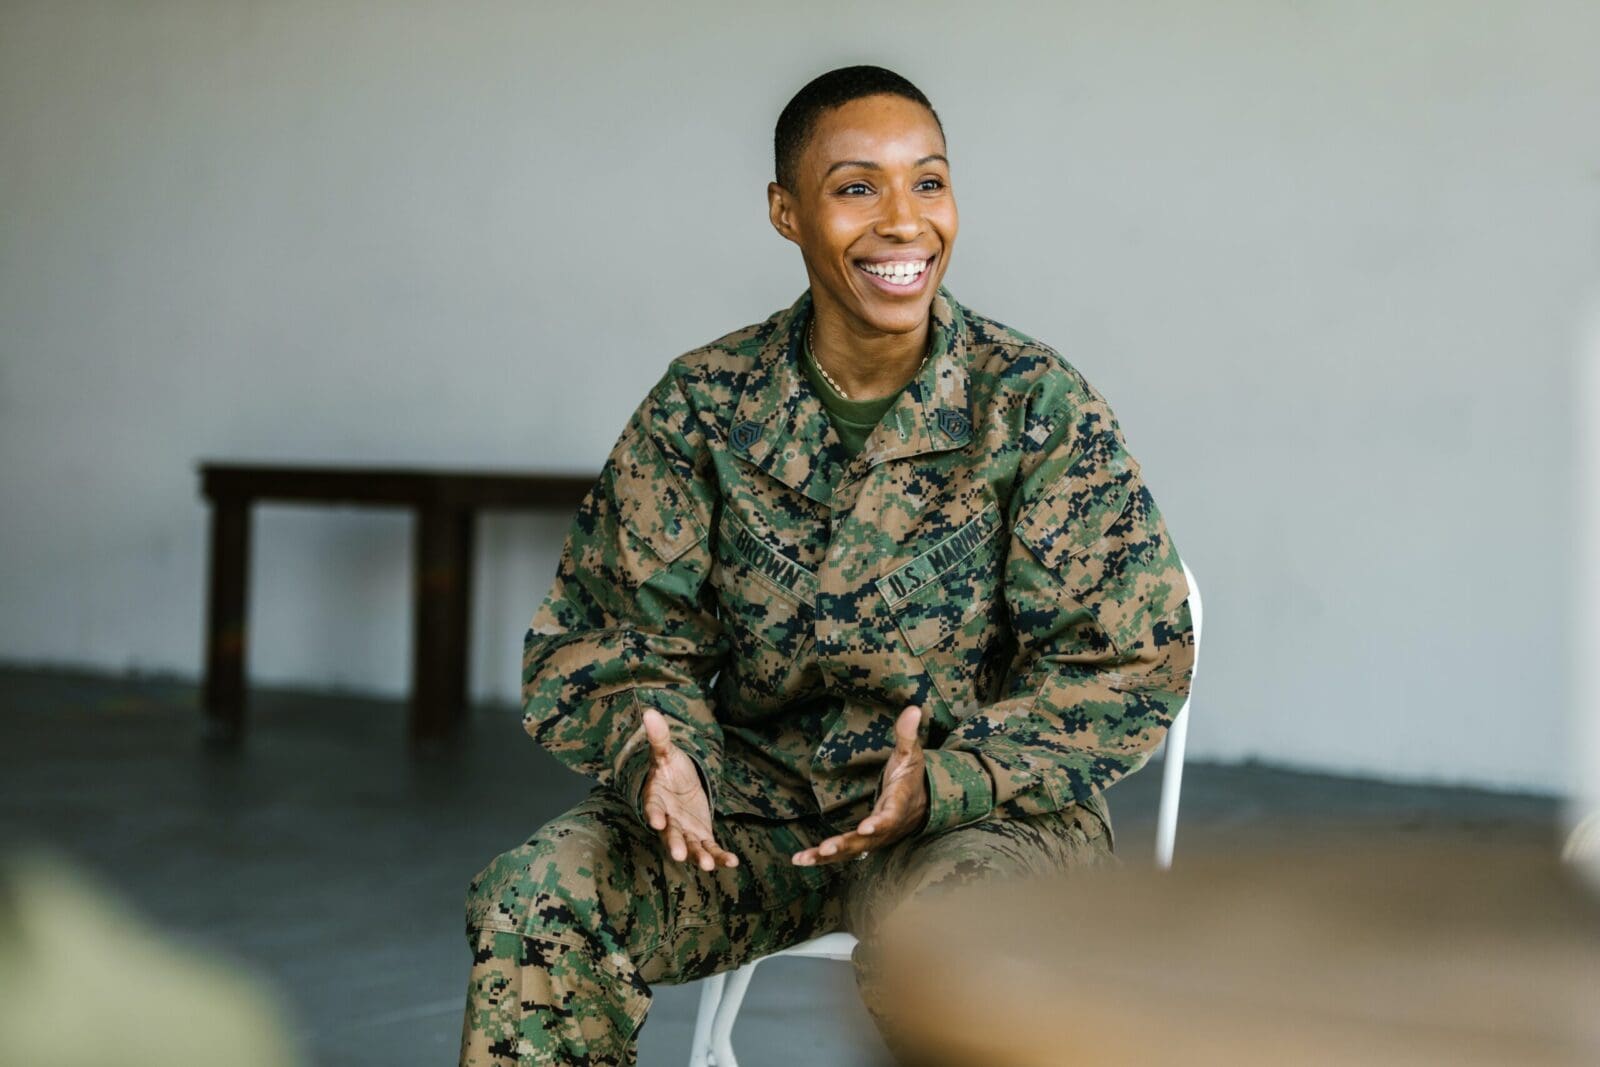 military member sitting in a chair smiling